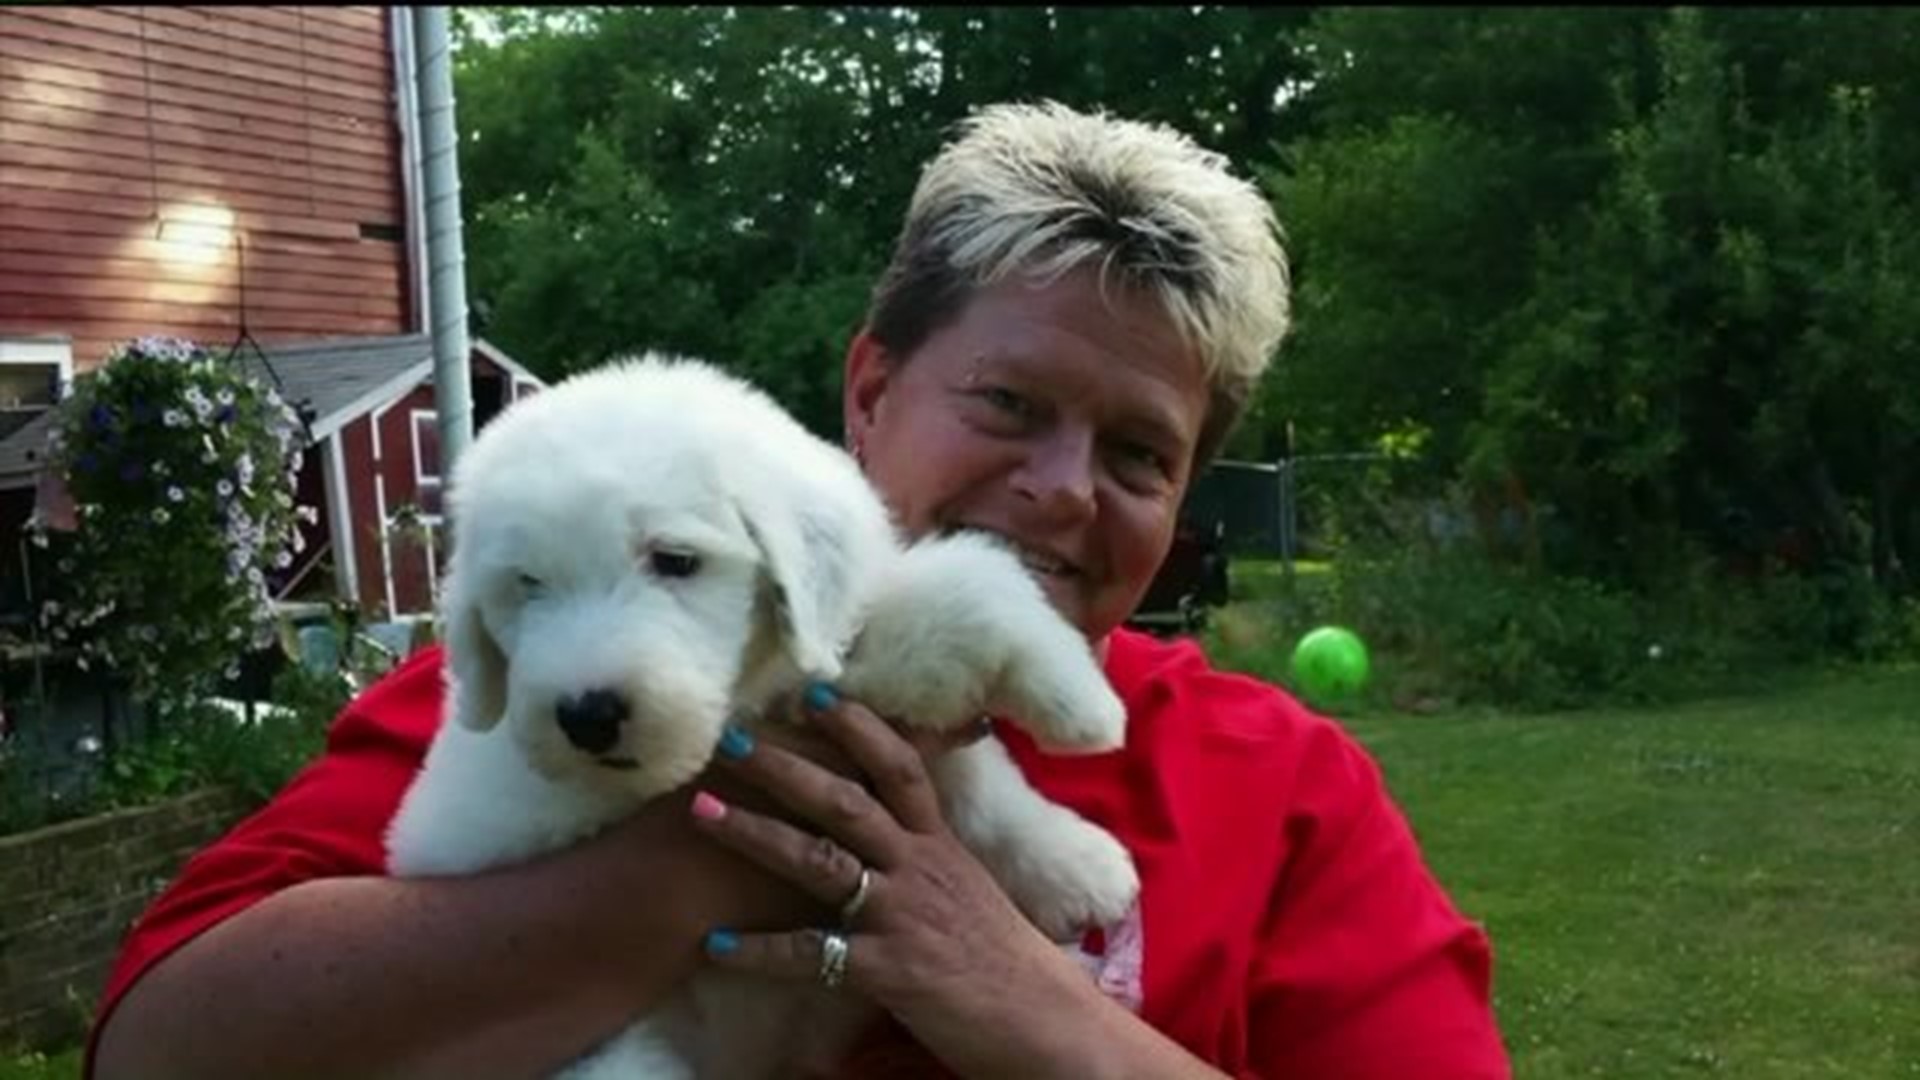 "Emotional and just disbelief," Dog Trainer, Friend Mourned in Dushore